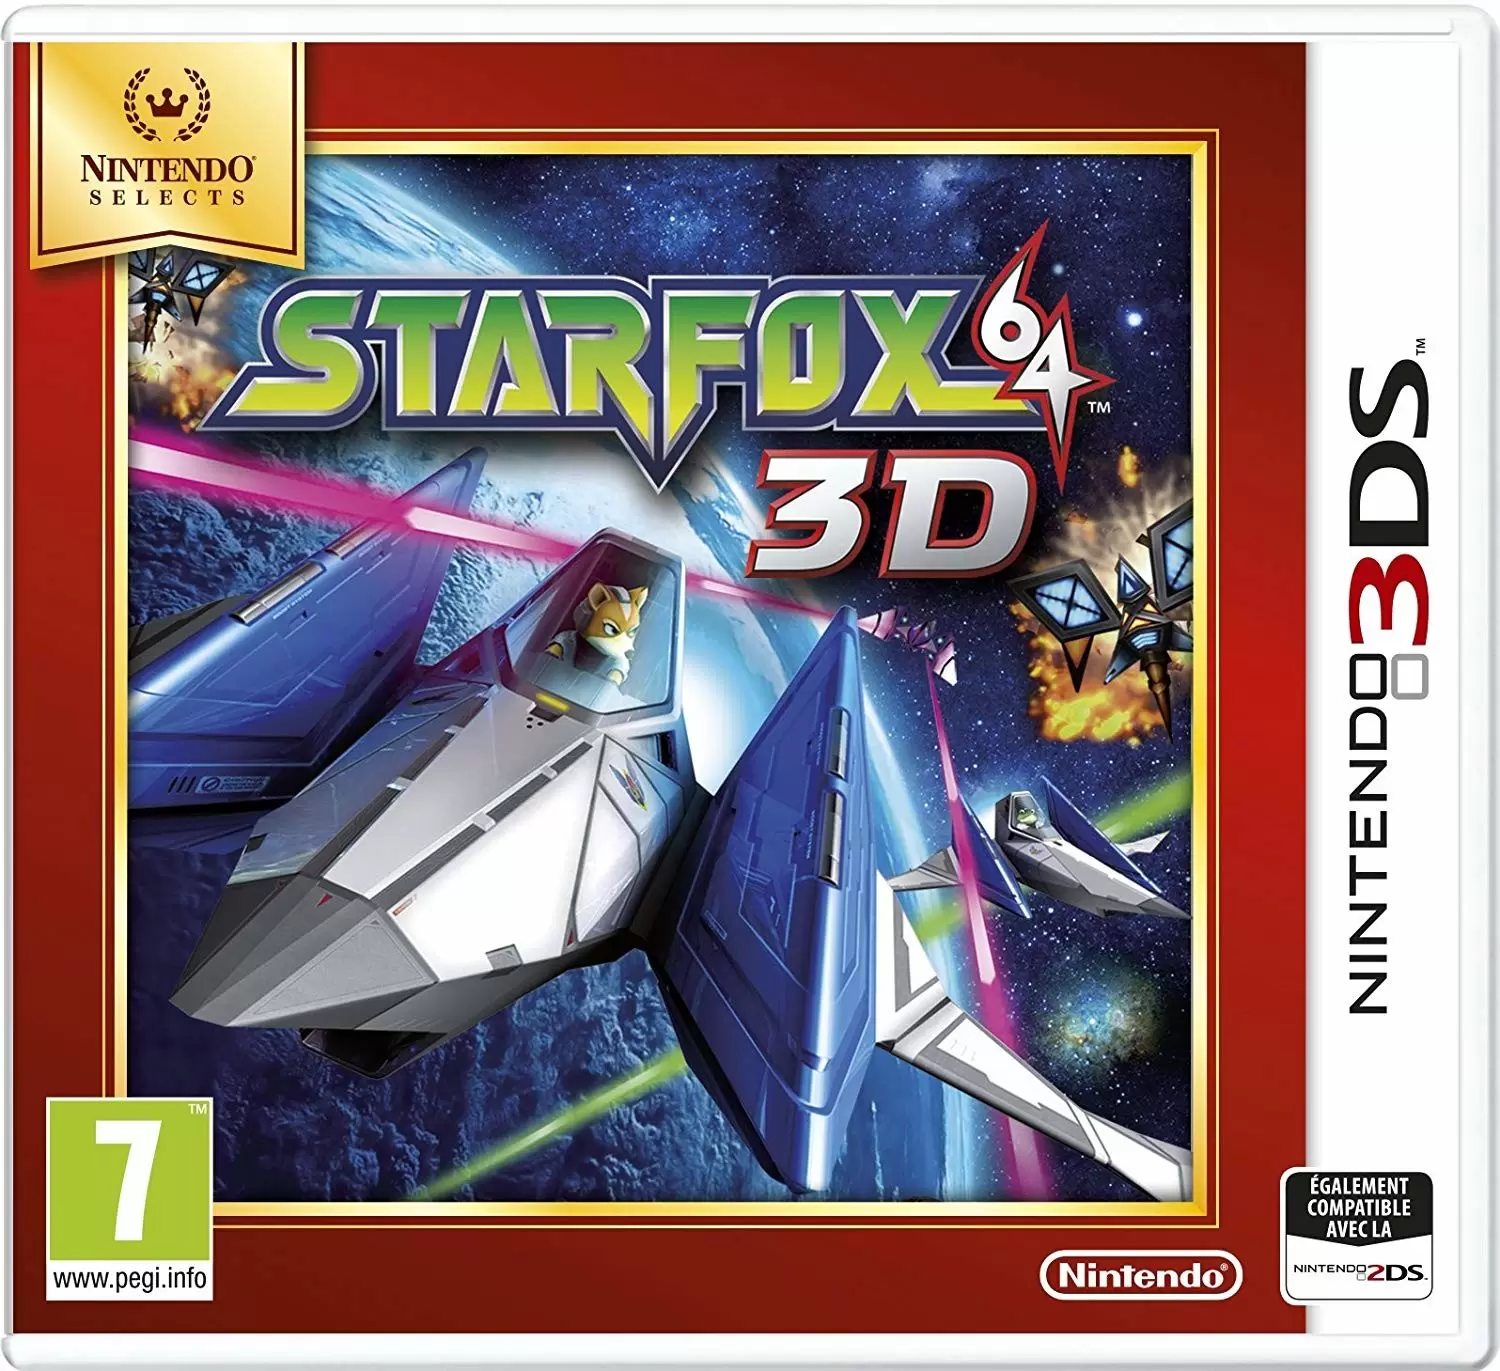 Jeux Nintendo 2DS / 3DS - Star Fox 64 (SELECTS)